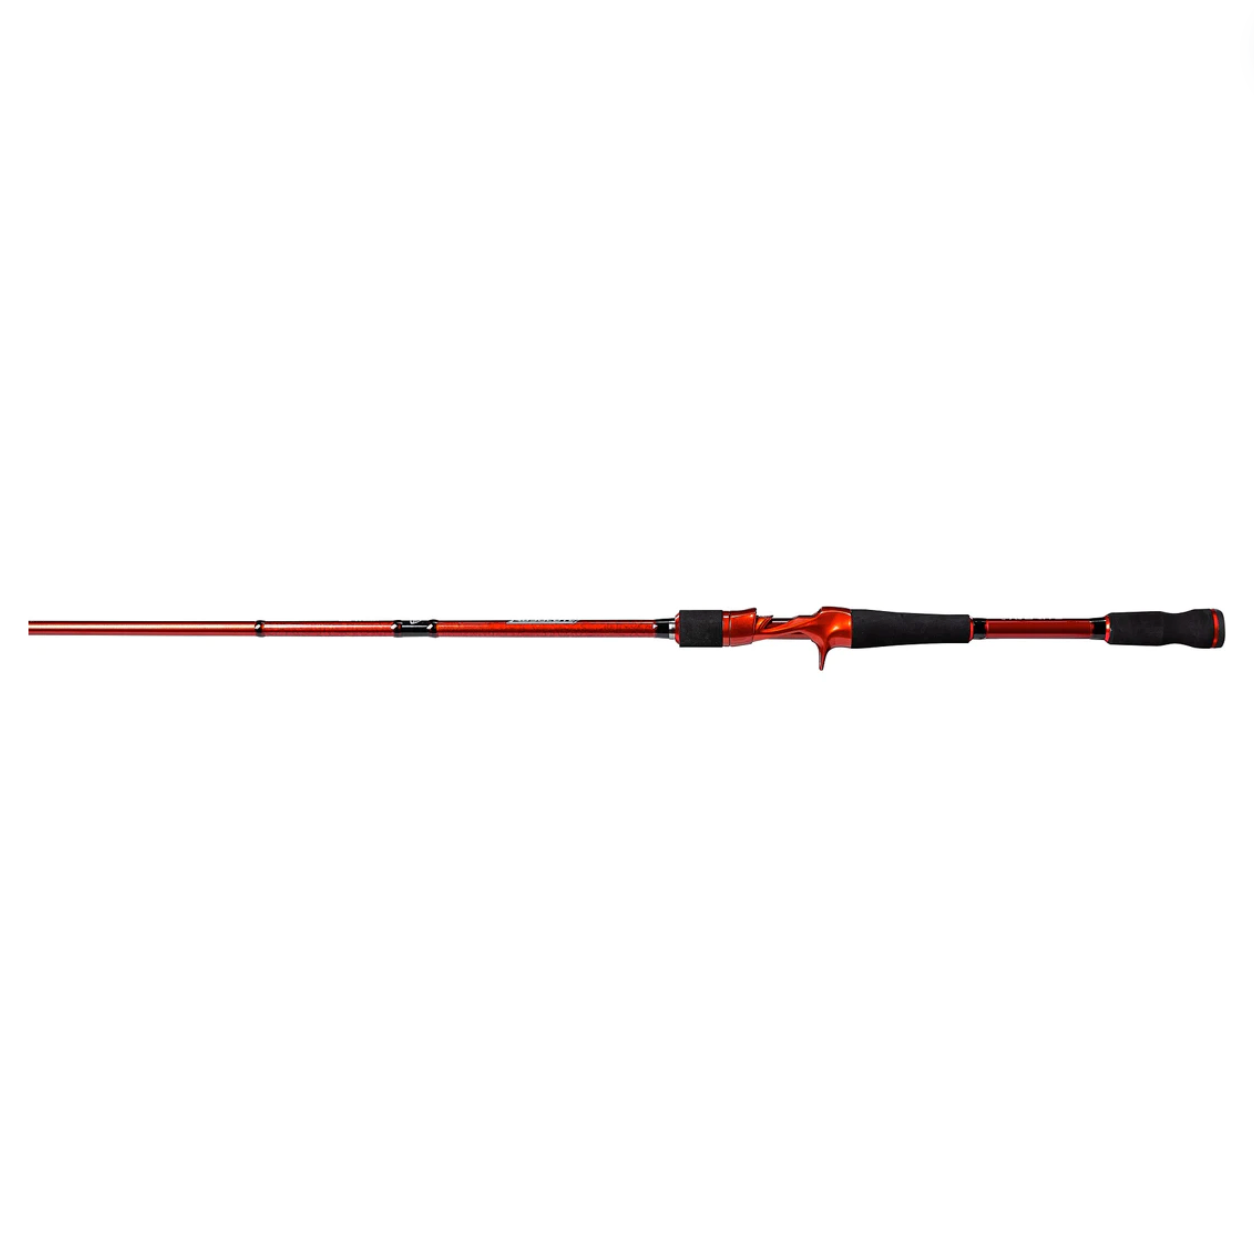 FAVORITE ABSOLUTE CASTING ROD 7'6"